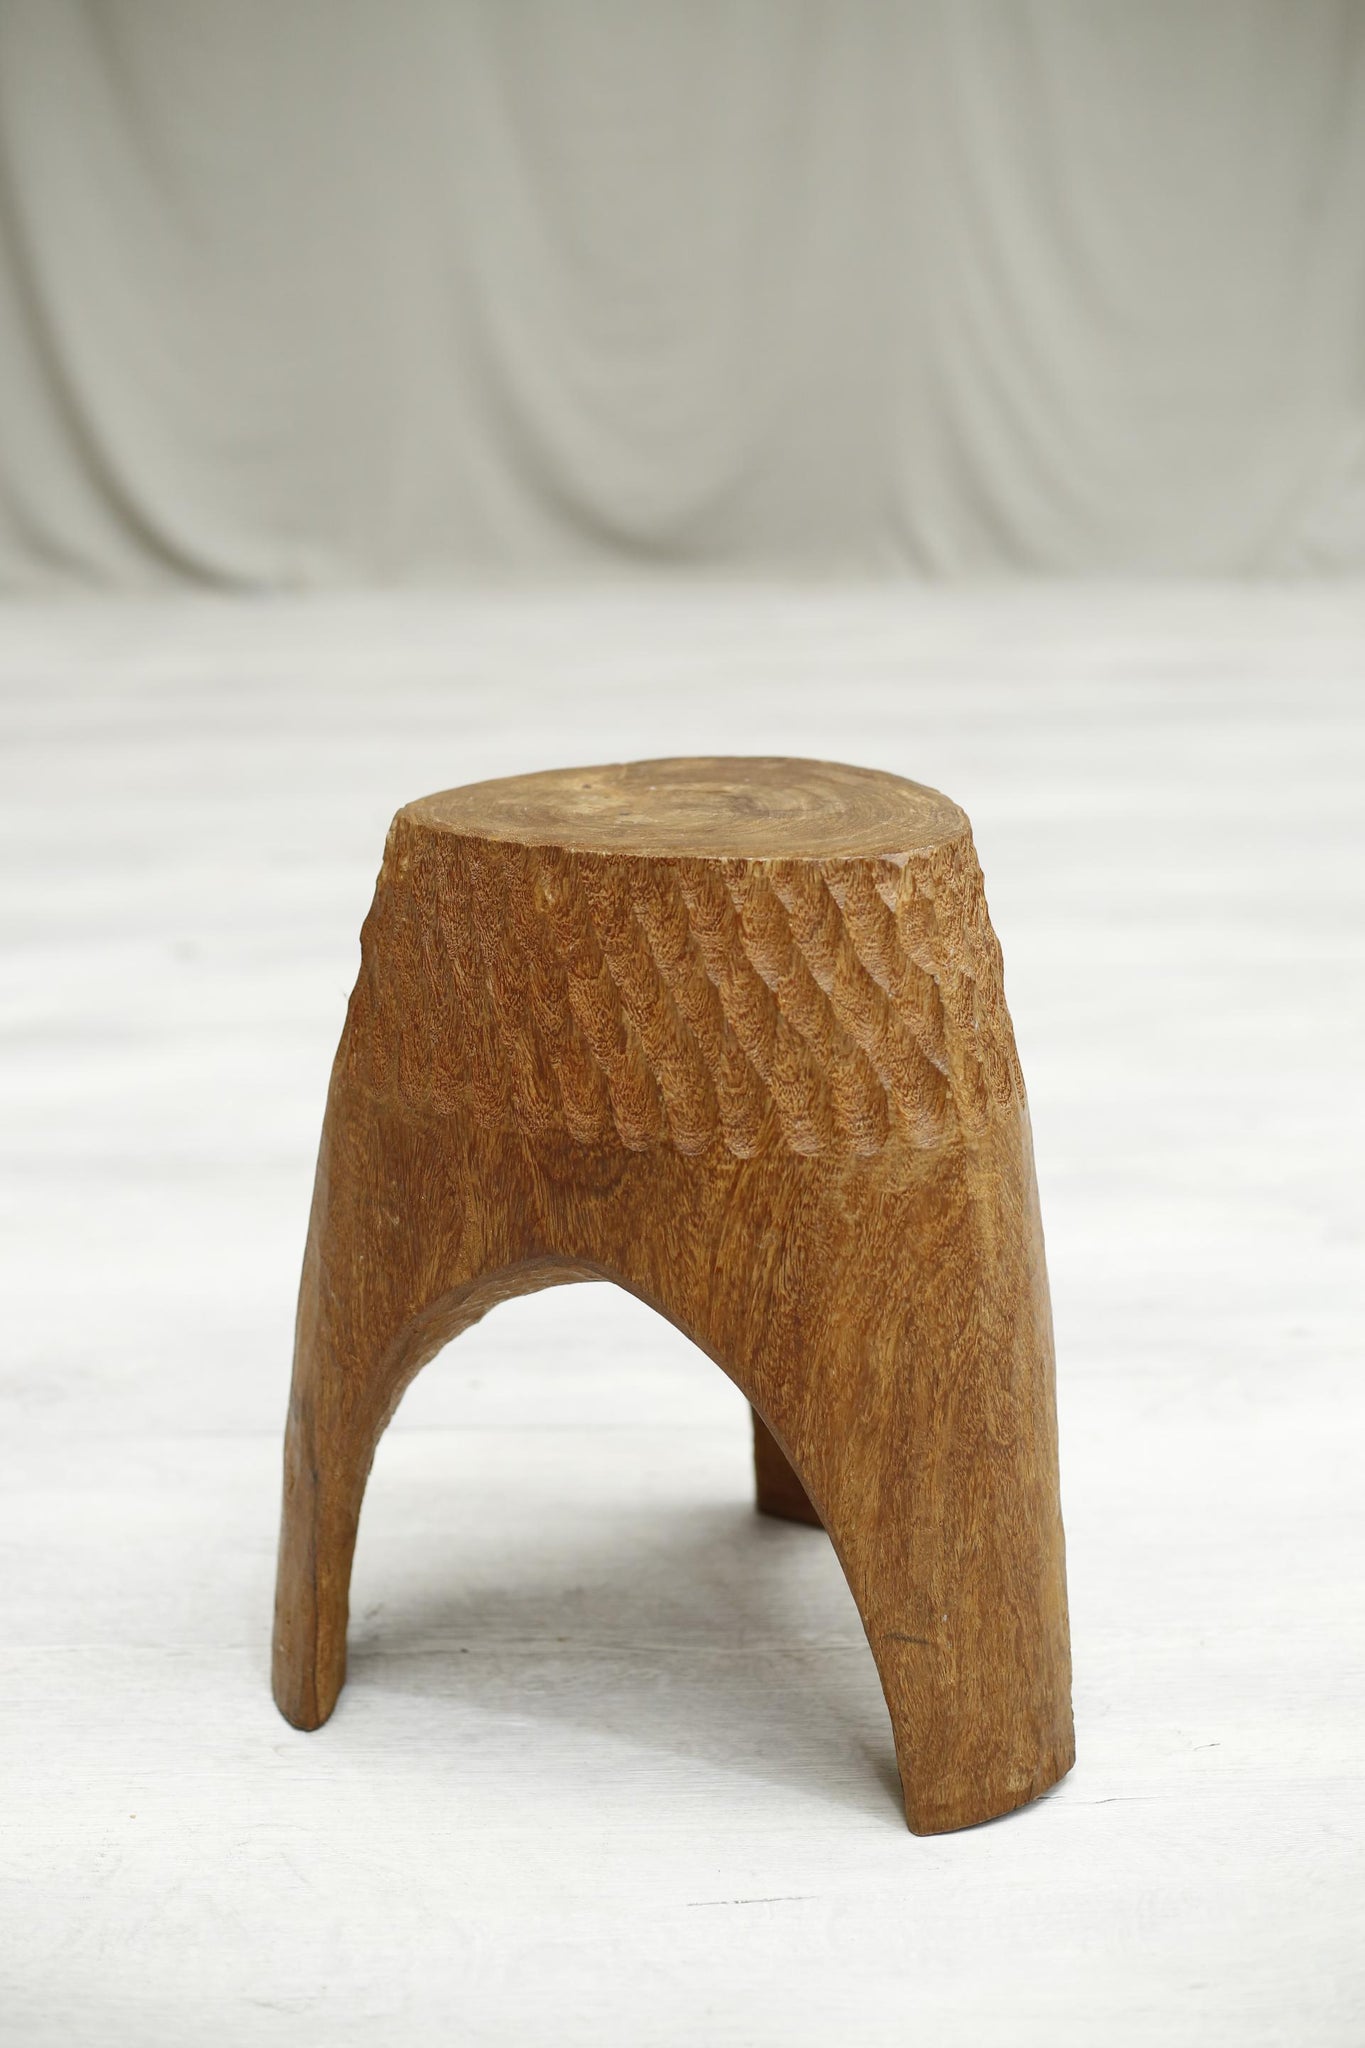 20th century Tribal African carved hardwood side table - TallBoy Interiors